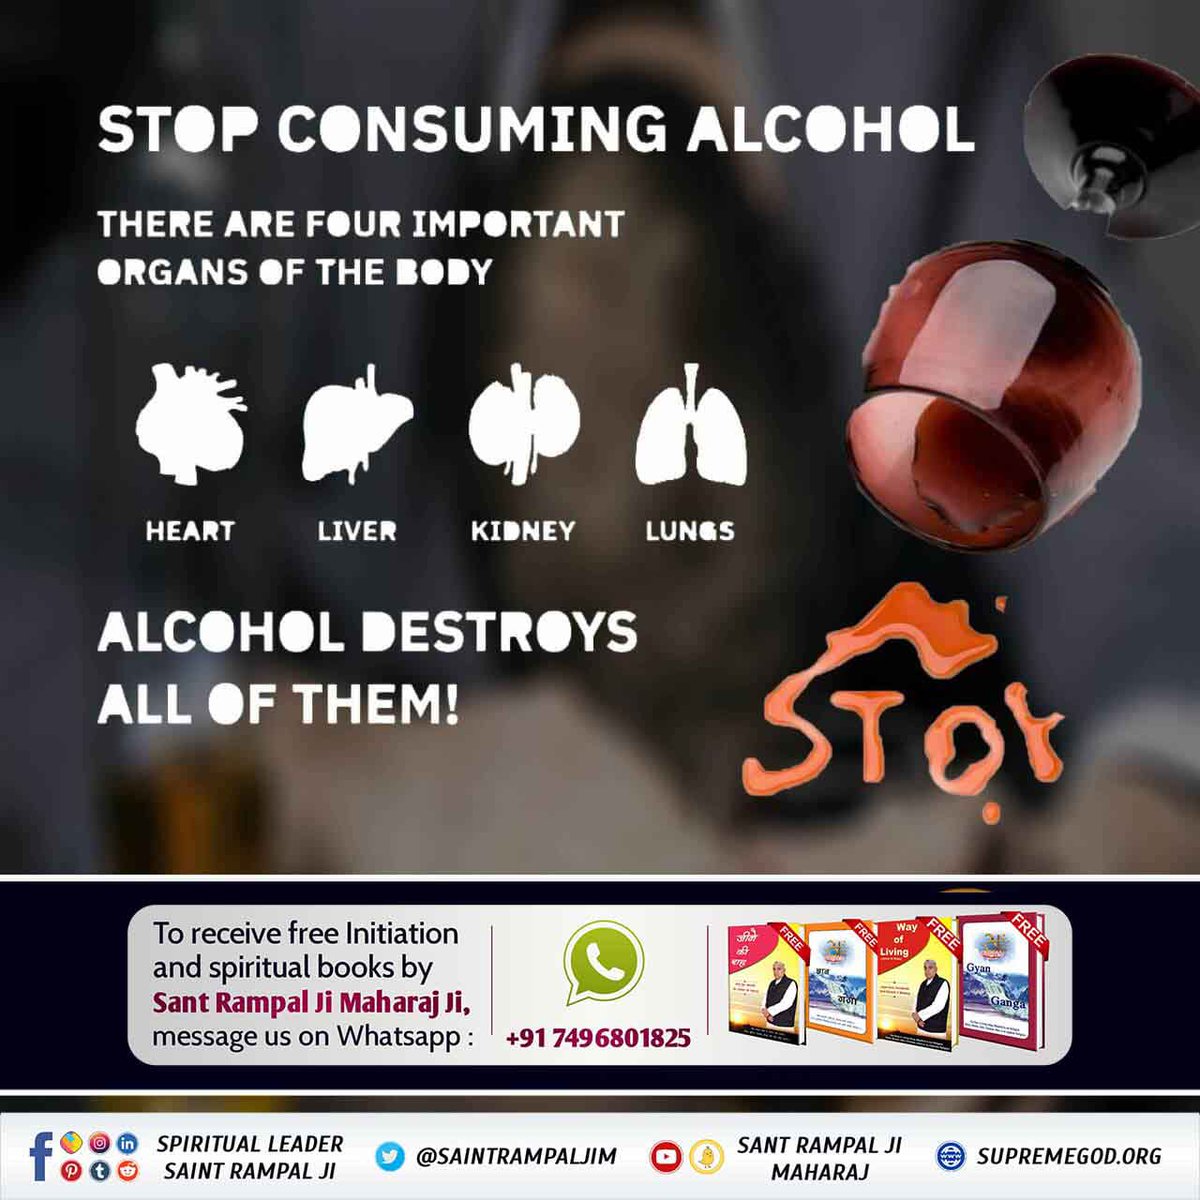 #FridayFeeling STOP CONSUMING ALCOHOL. THERE ARE FOUR IMPORTANT ORGANS OF THE BODY